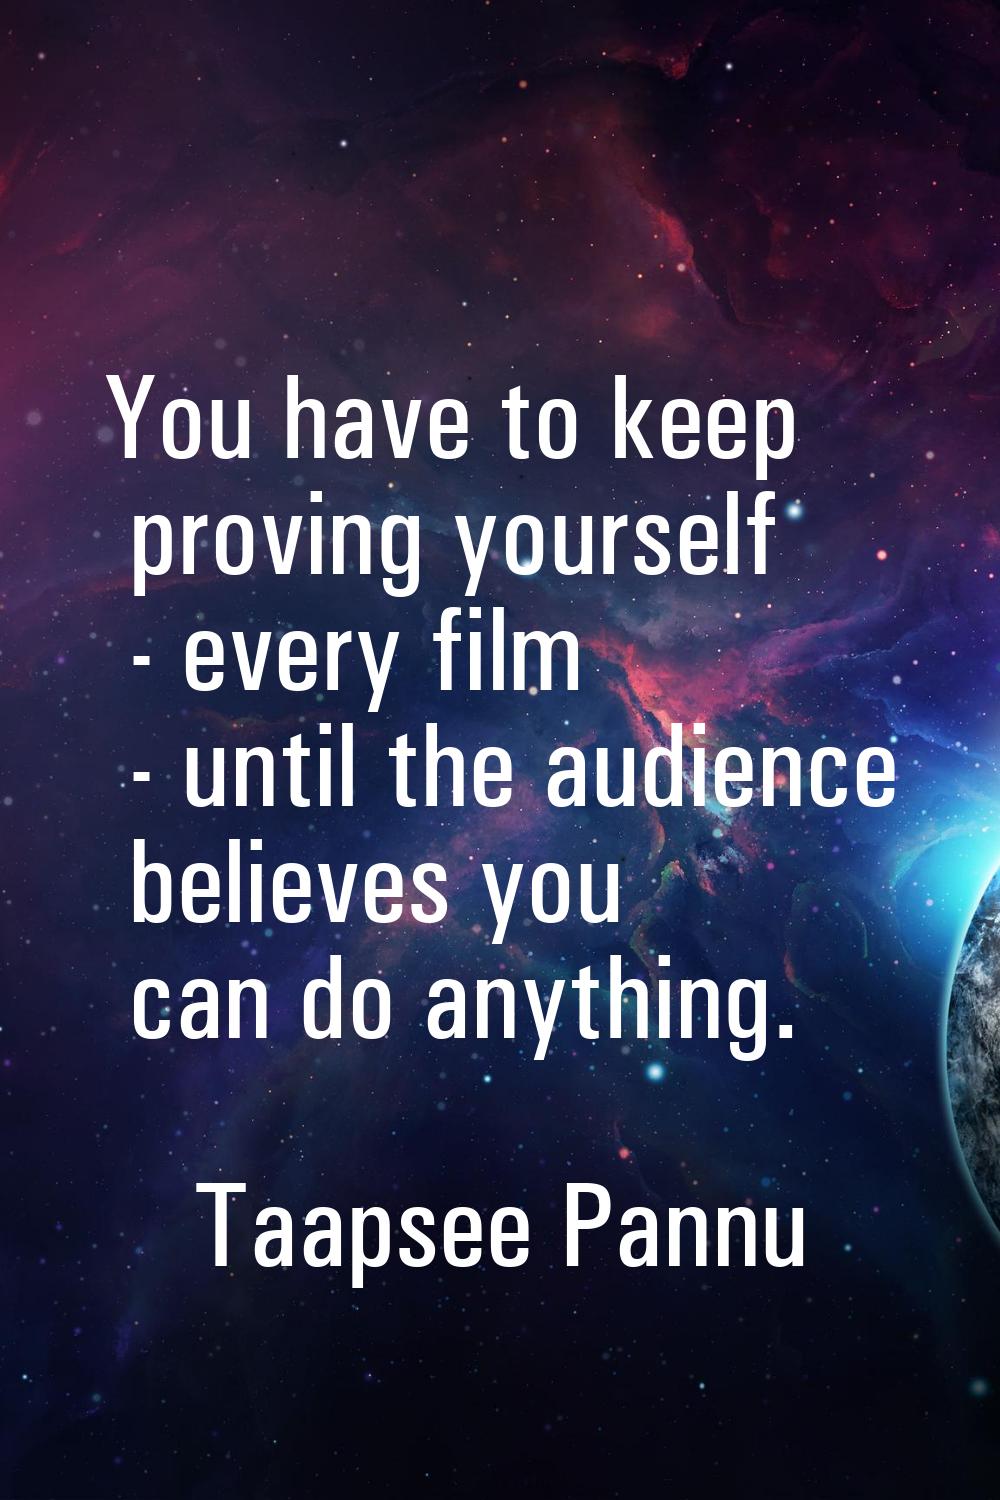 You have to keep proving yourself - every film - until the audience believes you can do anything.